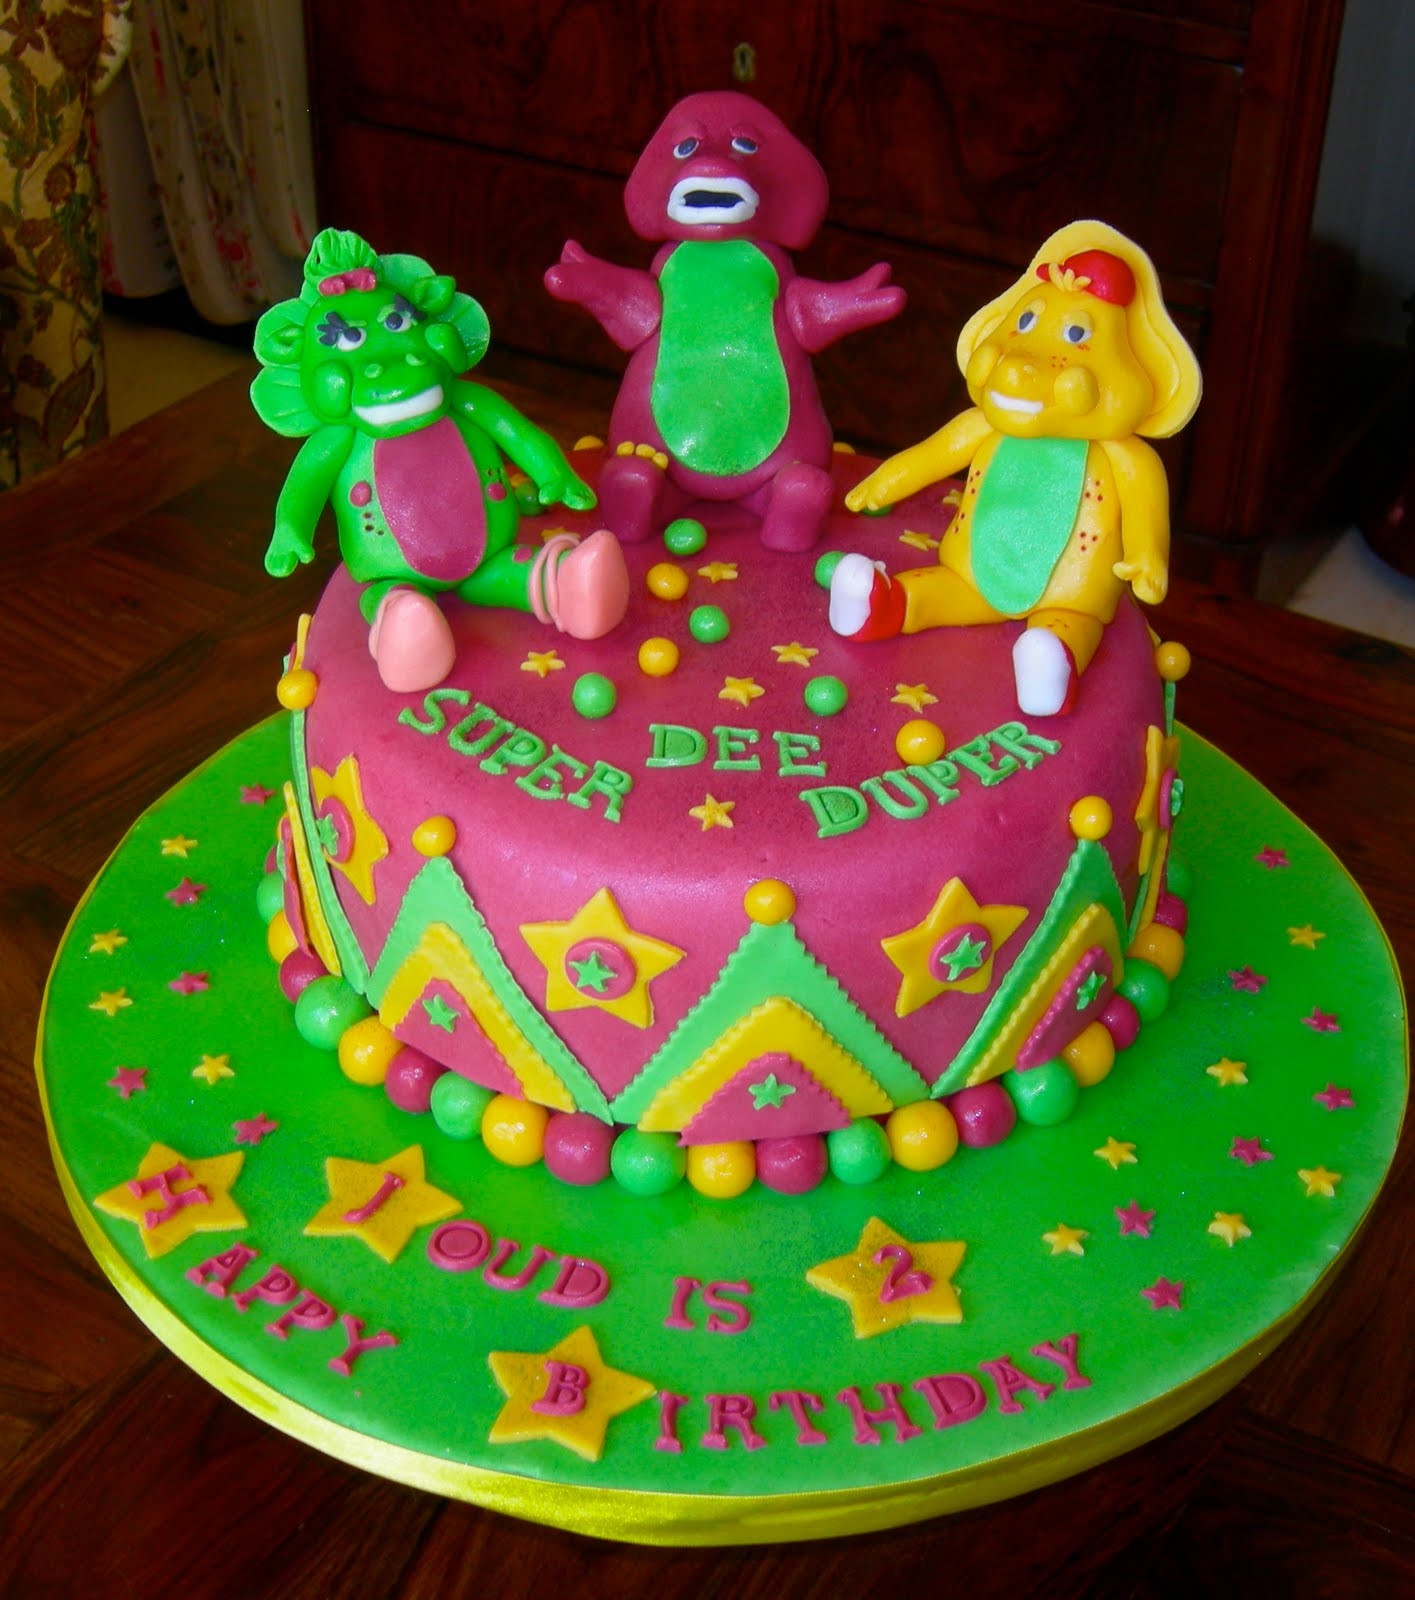 Barney Birthday Cakes
 ANOTHER BARNEY AND FRIENDS CAKE